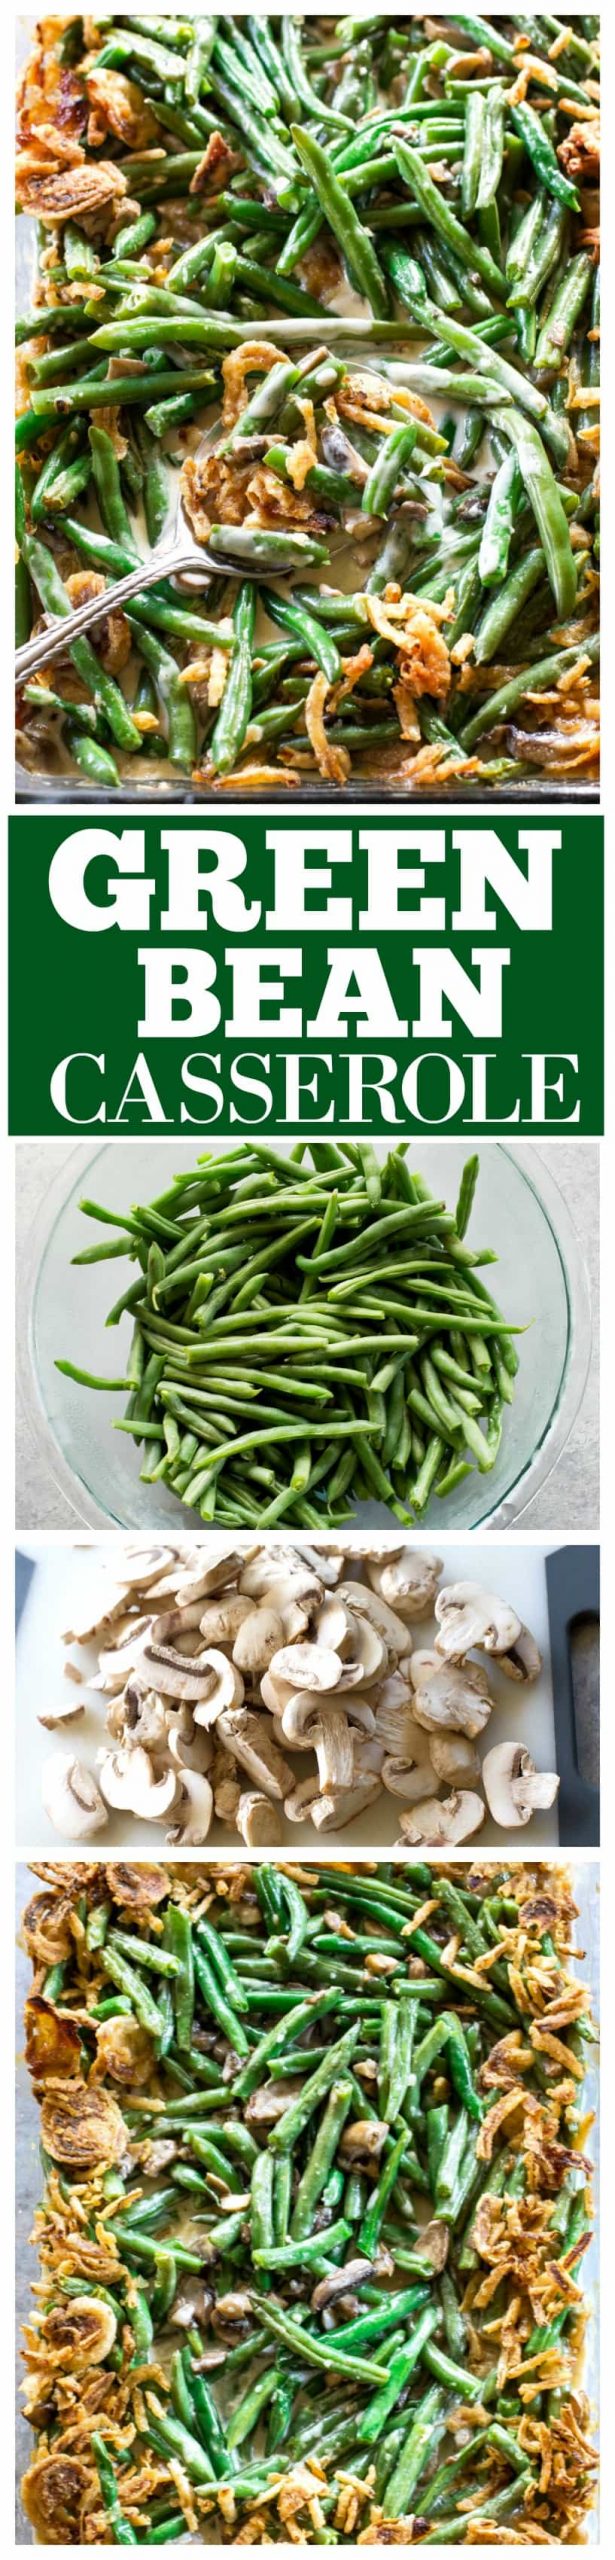 This homemade Green Bean Casserole recipe made without cream of mushroom soup. Easy and delicious side for Thanksgiving or any other holiday. #greenbeancasserole #green #bean #casserole #thanksgiving #side